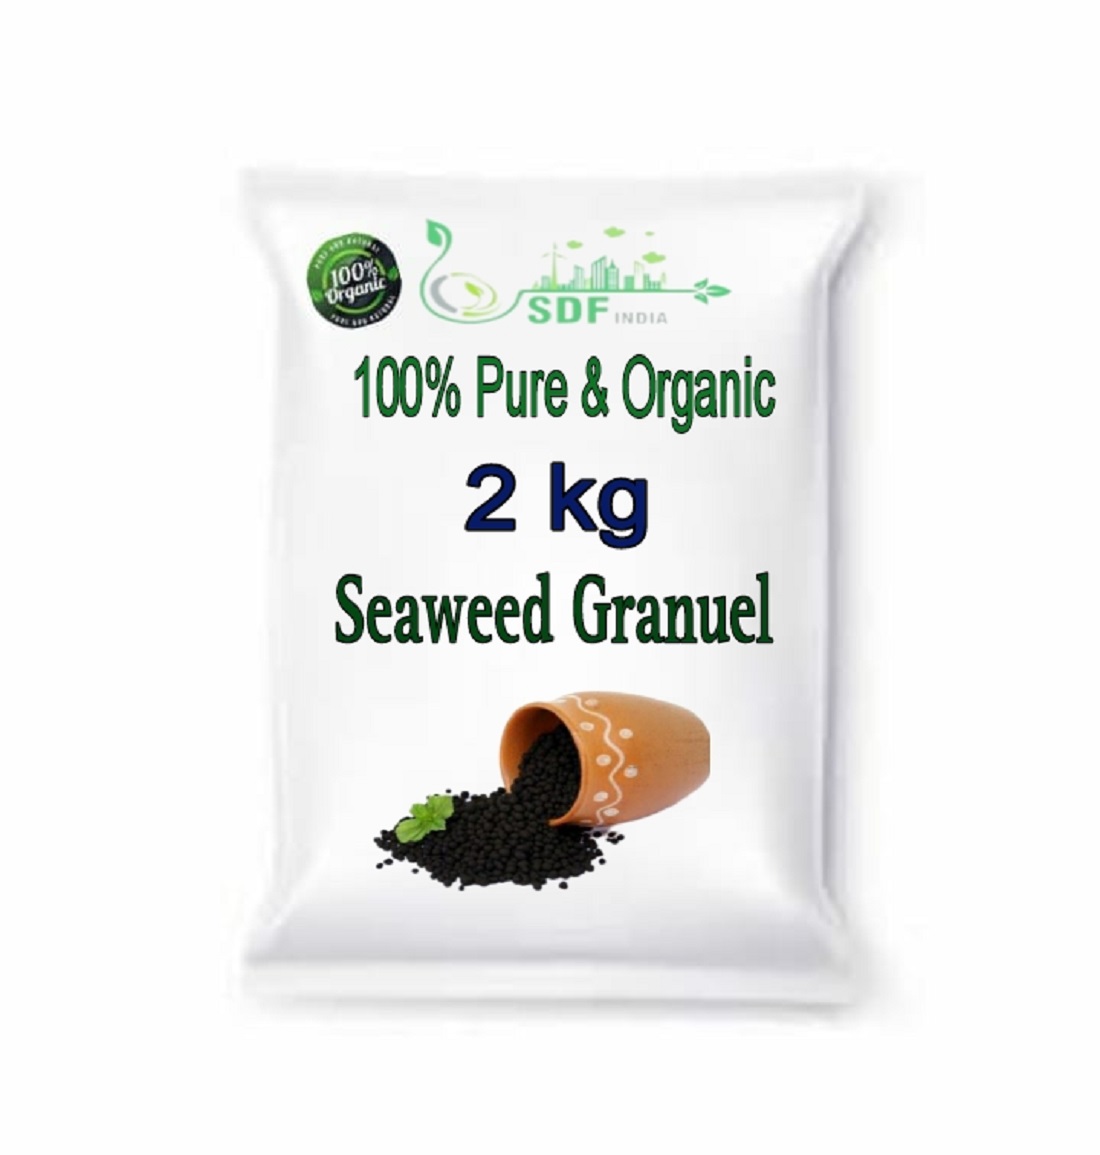 7008 SDFINDIA Seaweed Granules Organic Fertilizer, Plant Growth Promoter & Bio-Stimulant, Suitable for All Types of Plants 2kg (7008_Seaweed_G_2kg)